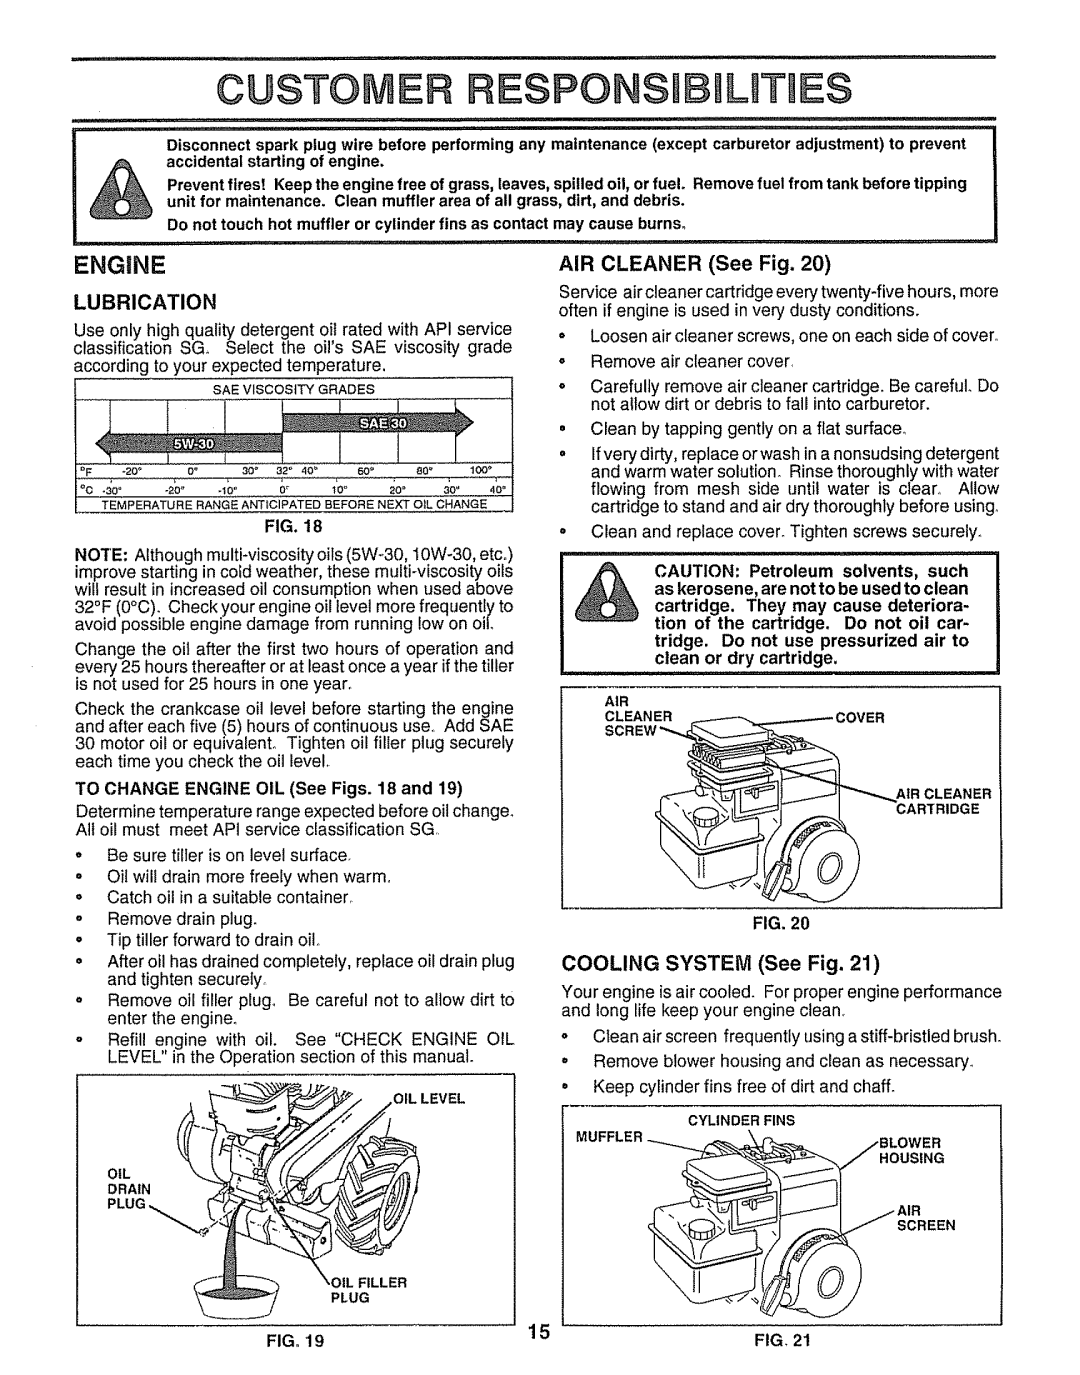 Craftsman 917.29555 manual Custo, Il Es, Engine, AIR CLEANER See Fig, COOLING SYSTEM See Fig, Lubrication 